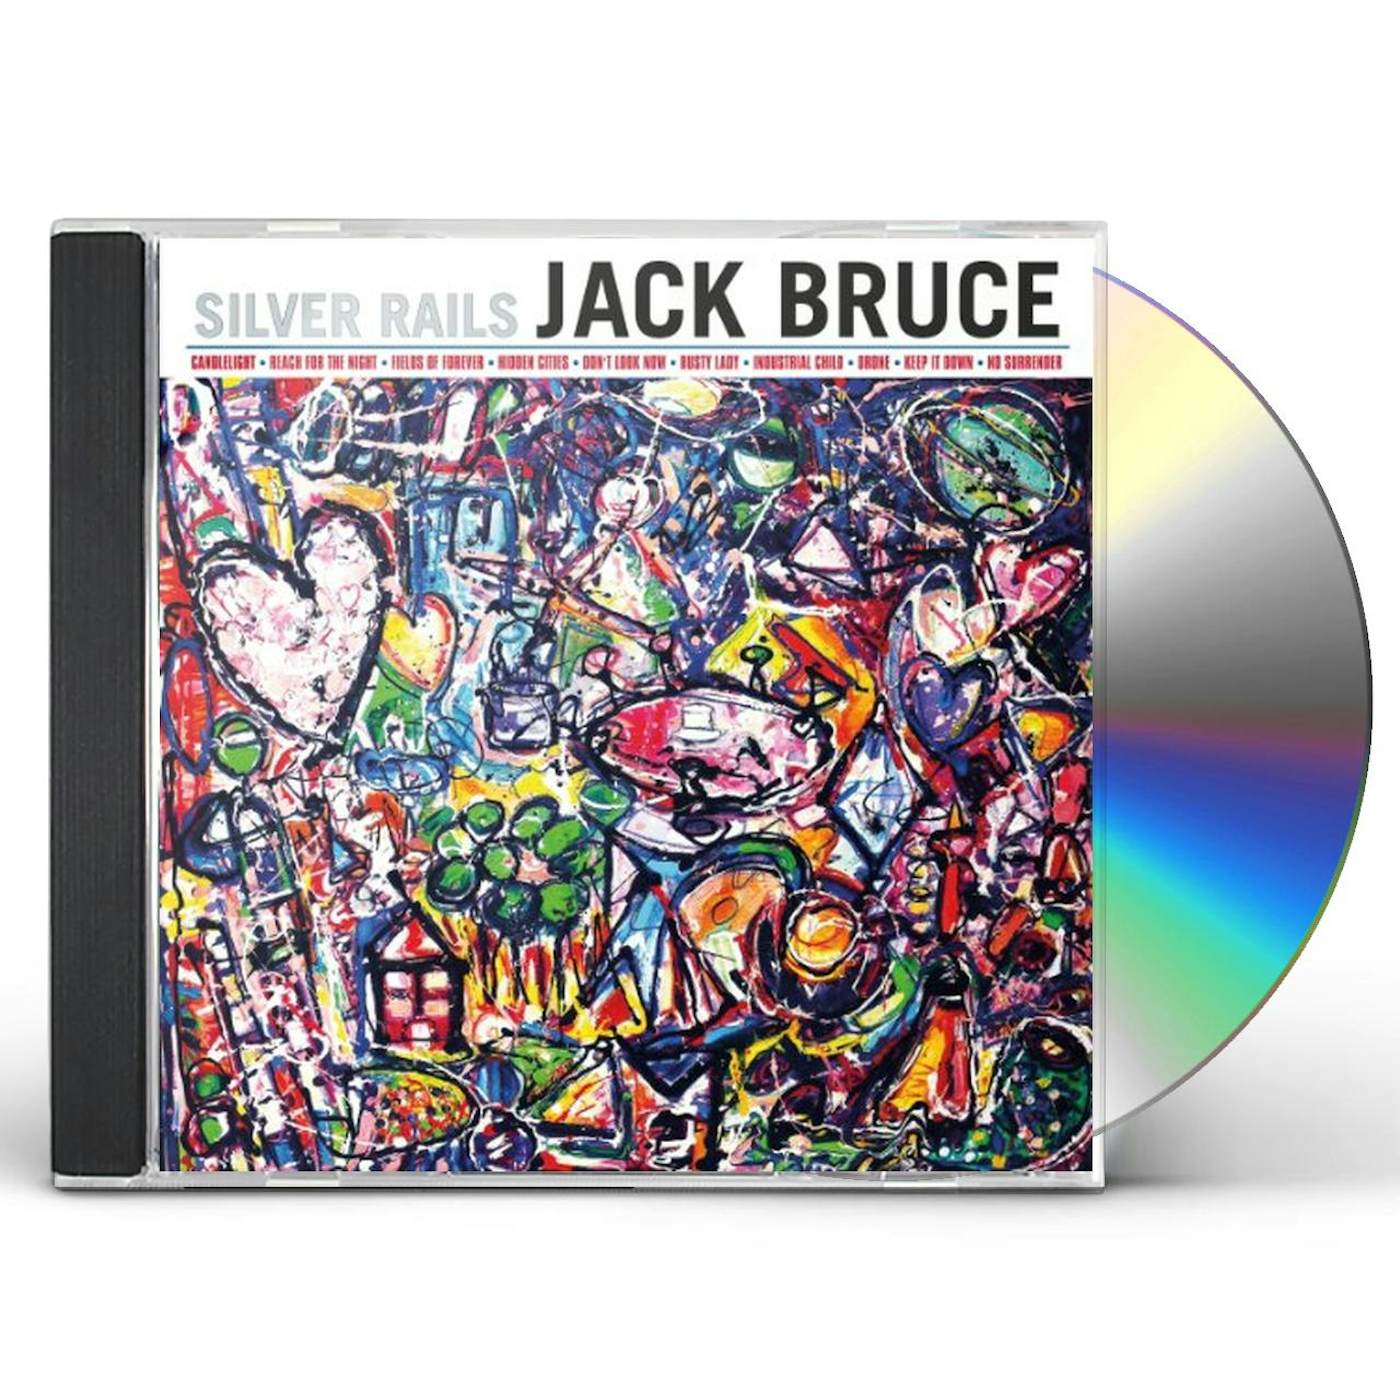 Jack Bruce SILVER RAILS: DELUXE LIMITED EDITION CD